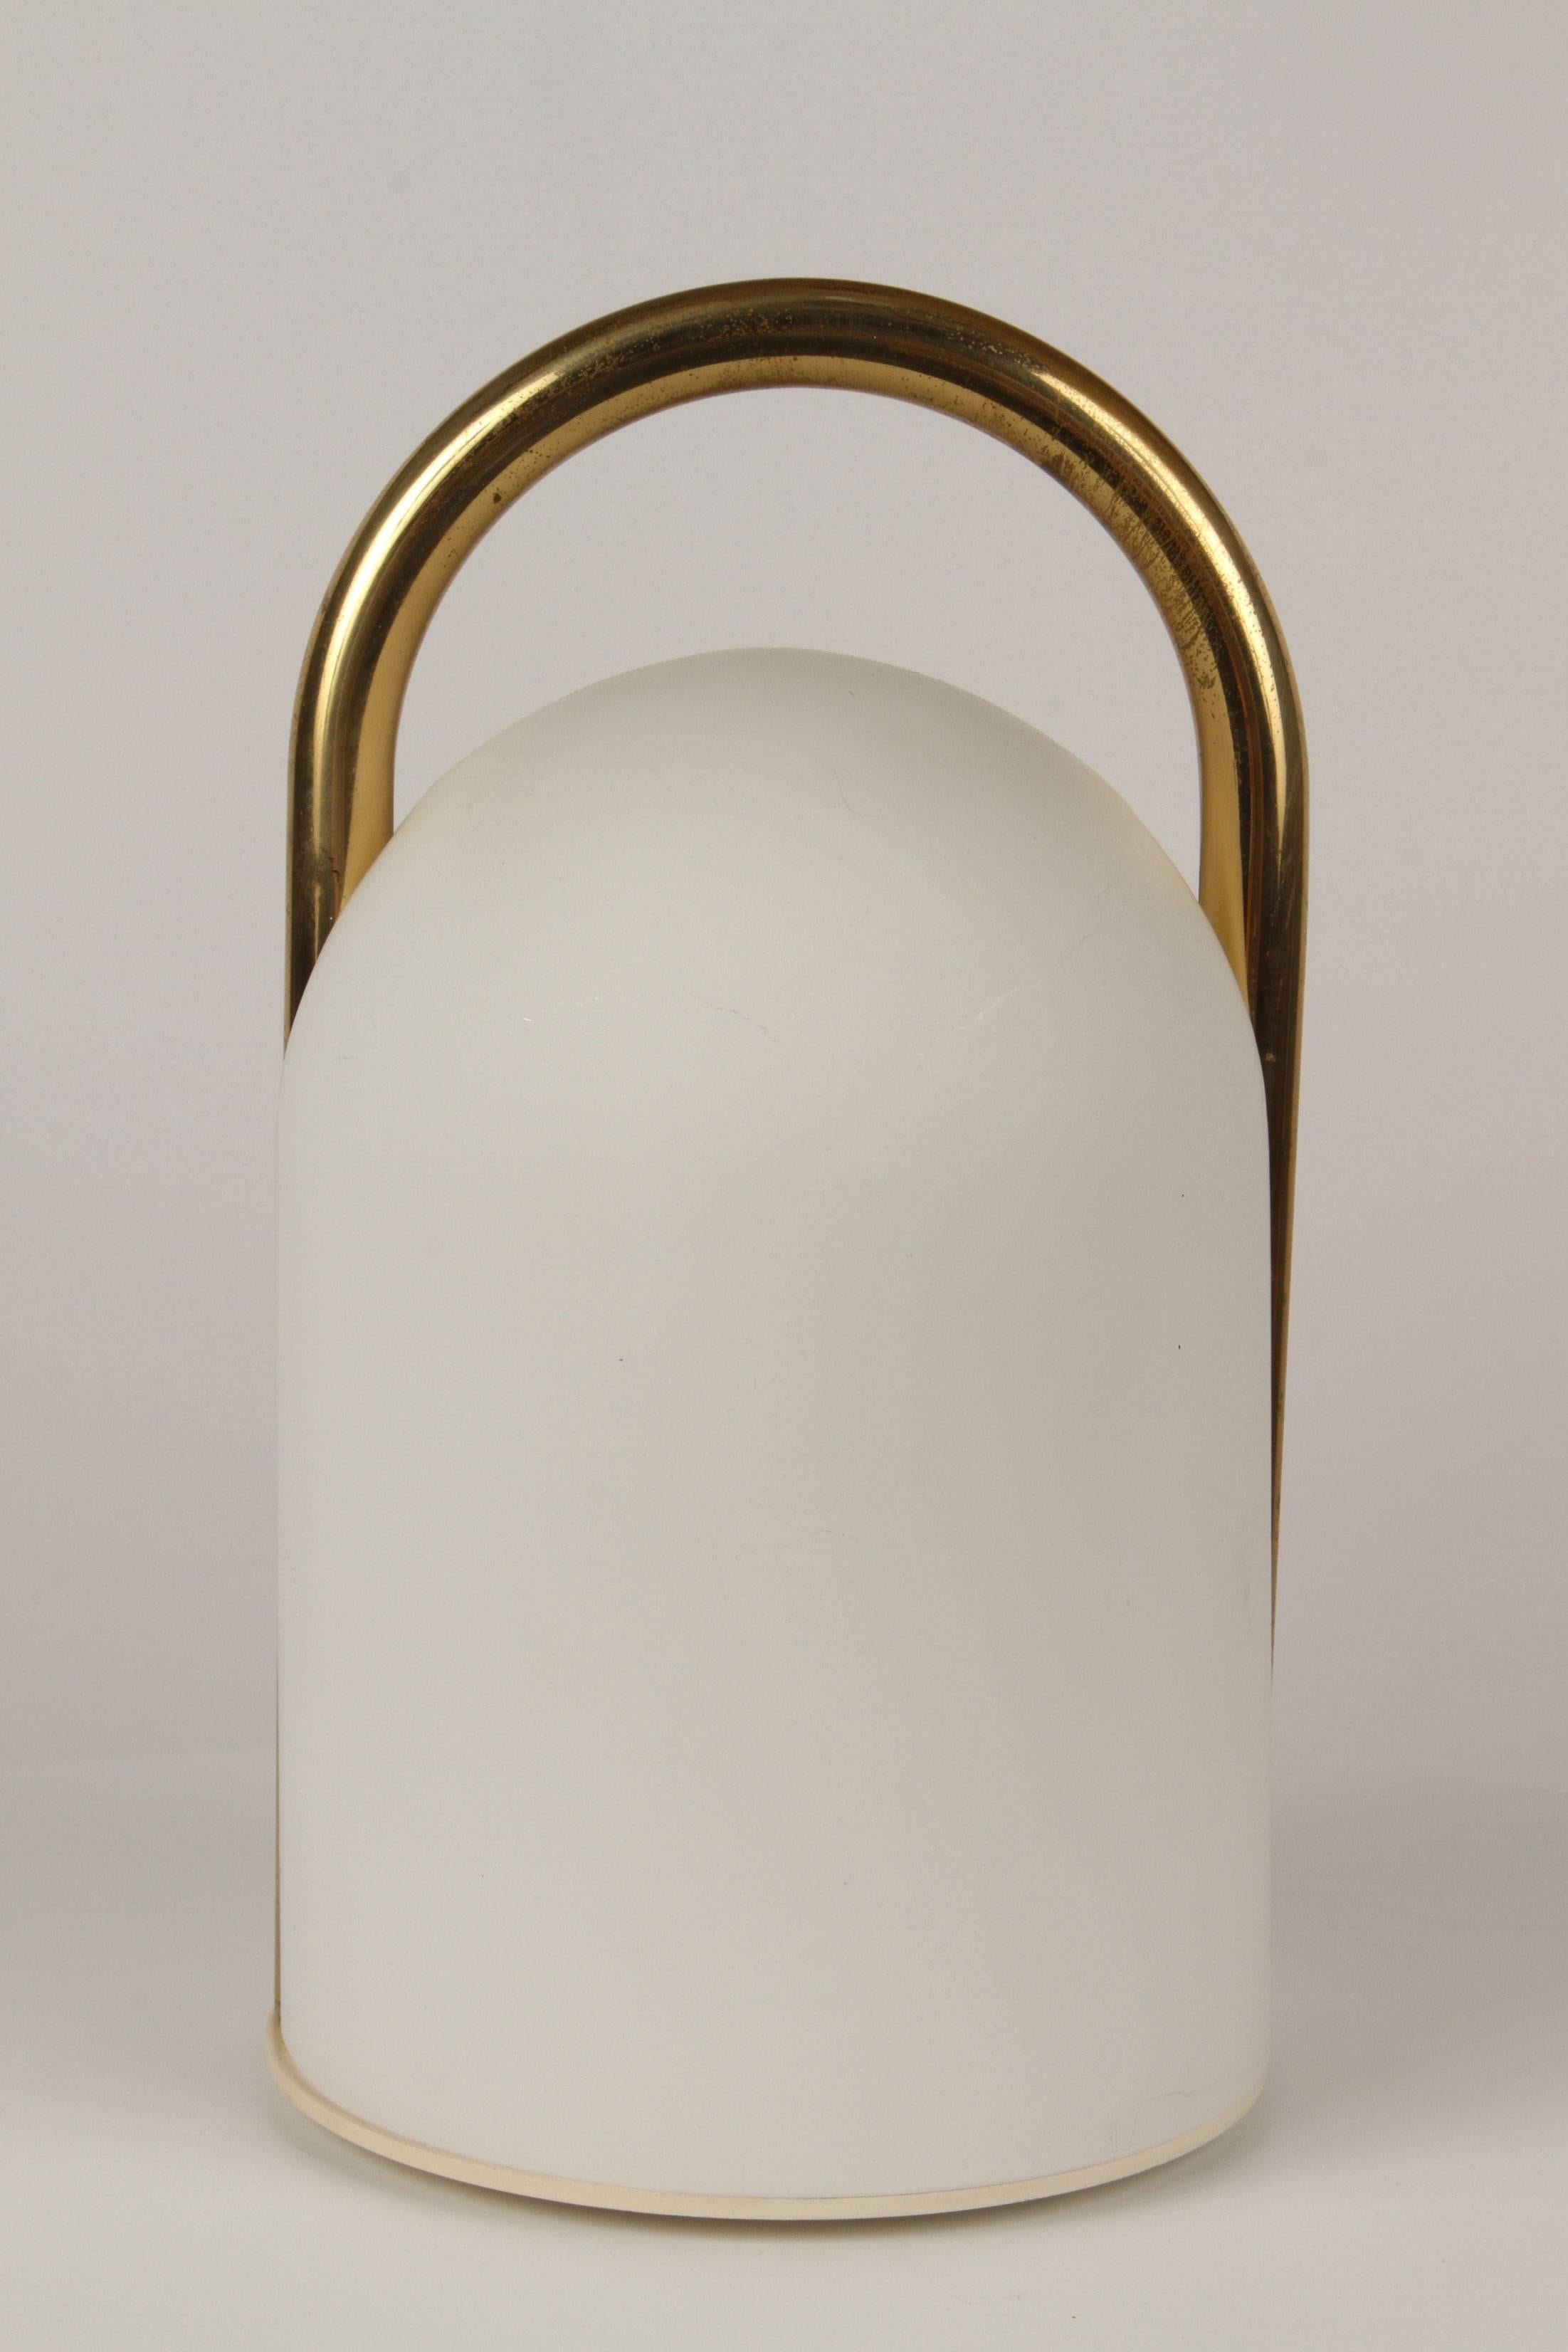 1980s Romolo Lanciani brass and glass 'Tender' table lamps for Tronconi. Executed in opaline glass and rare brass finish, Italy, circa 1980s.

Price is for the pair.

Tronconi was a major Italian lighting and design company founded by Enrico